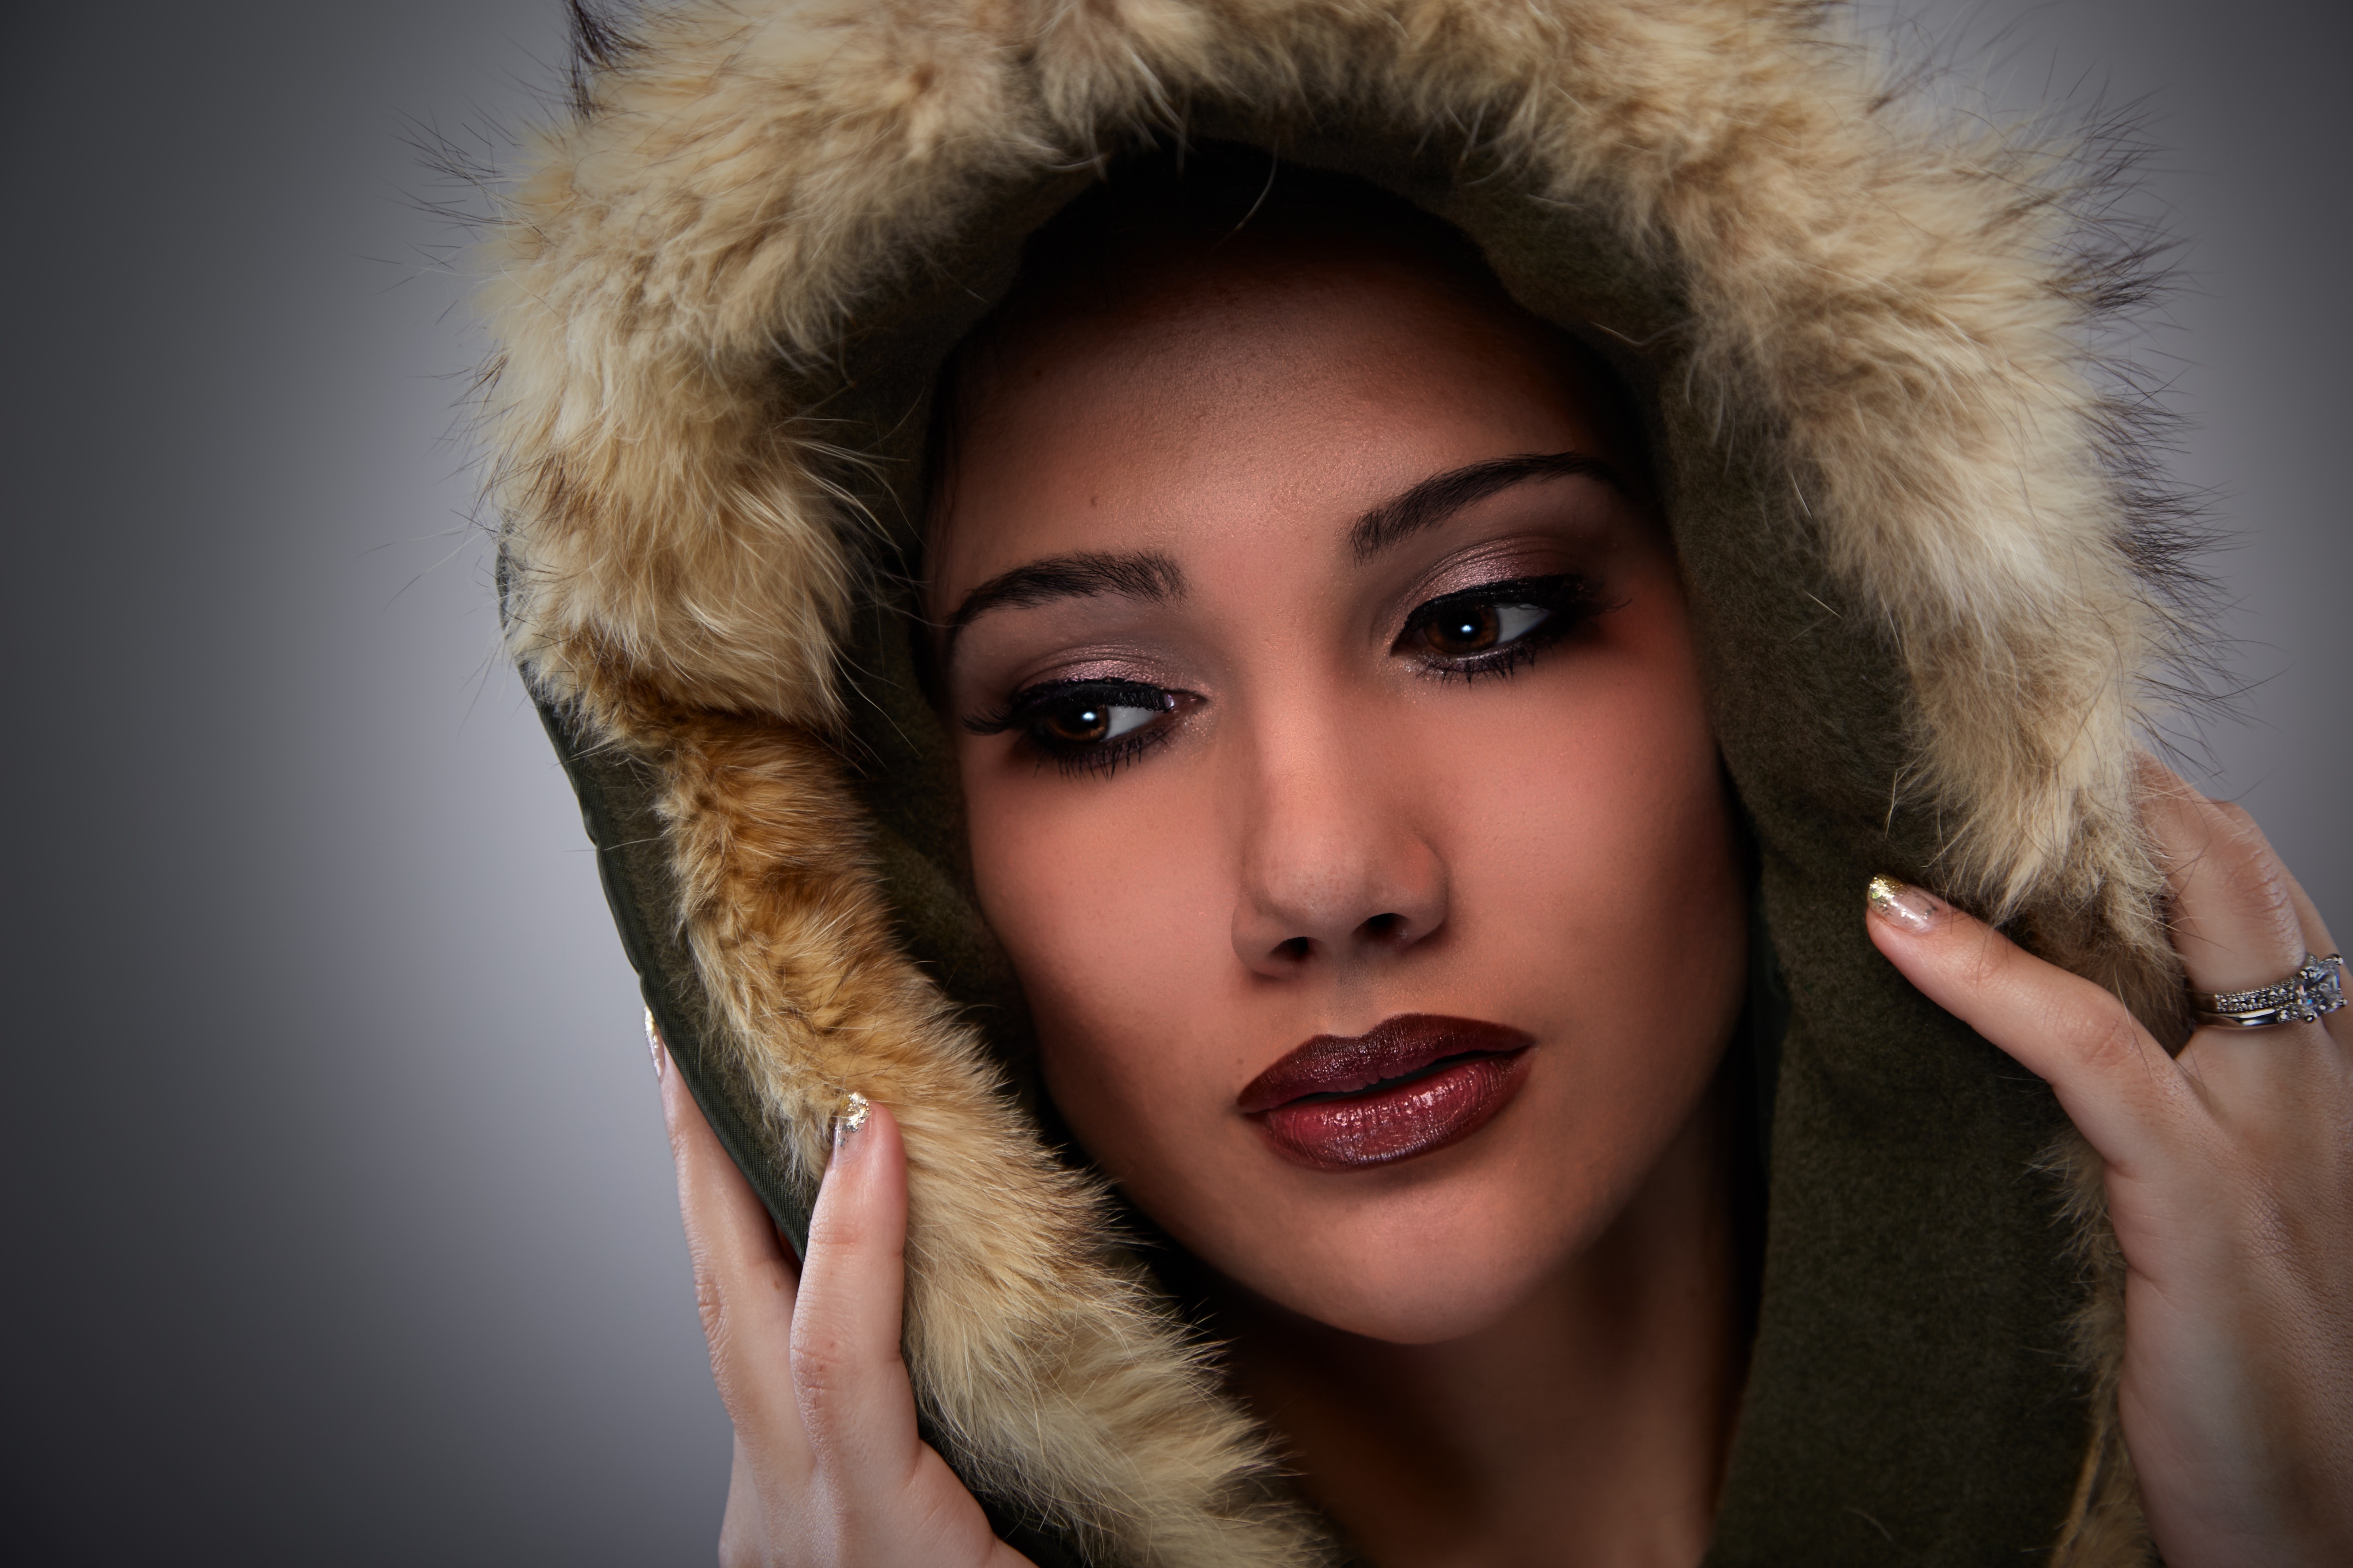 Woman on black mascara red lipstick cover her face with brown fur coat photo